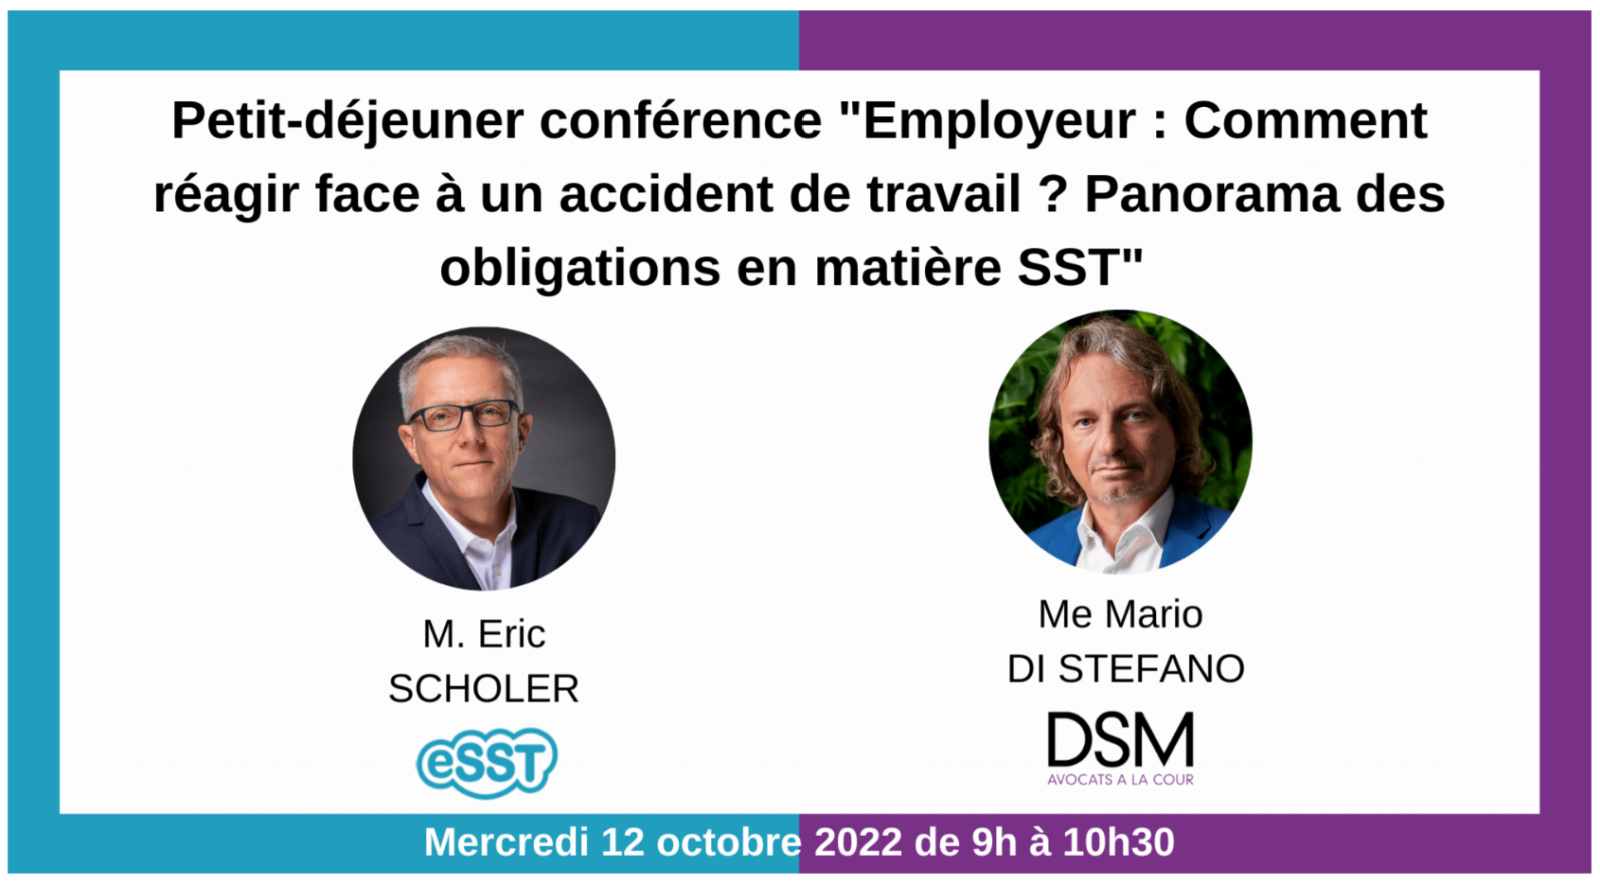 "Employer: How to react to a work accident? Overview of the obligations in OHS " by Mr. Mario DI STEFANO (DSM Avocats à la Cour) and Mr. Eric SCHOLER (eSST) - Wednesday, October 12, 2022 from 9:00 to 10:30 am